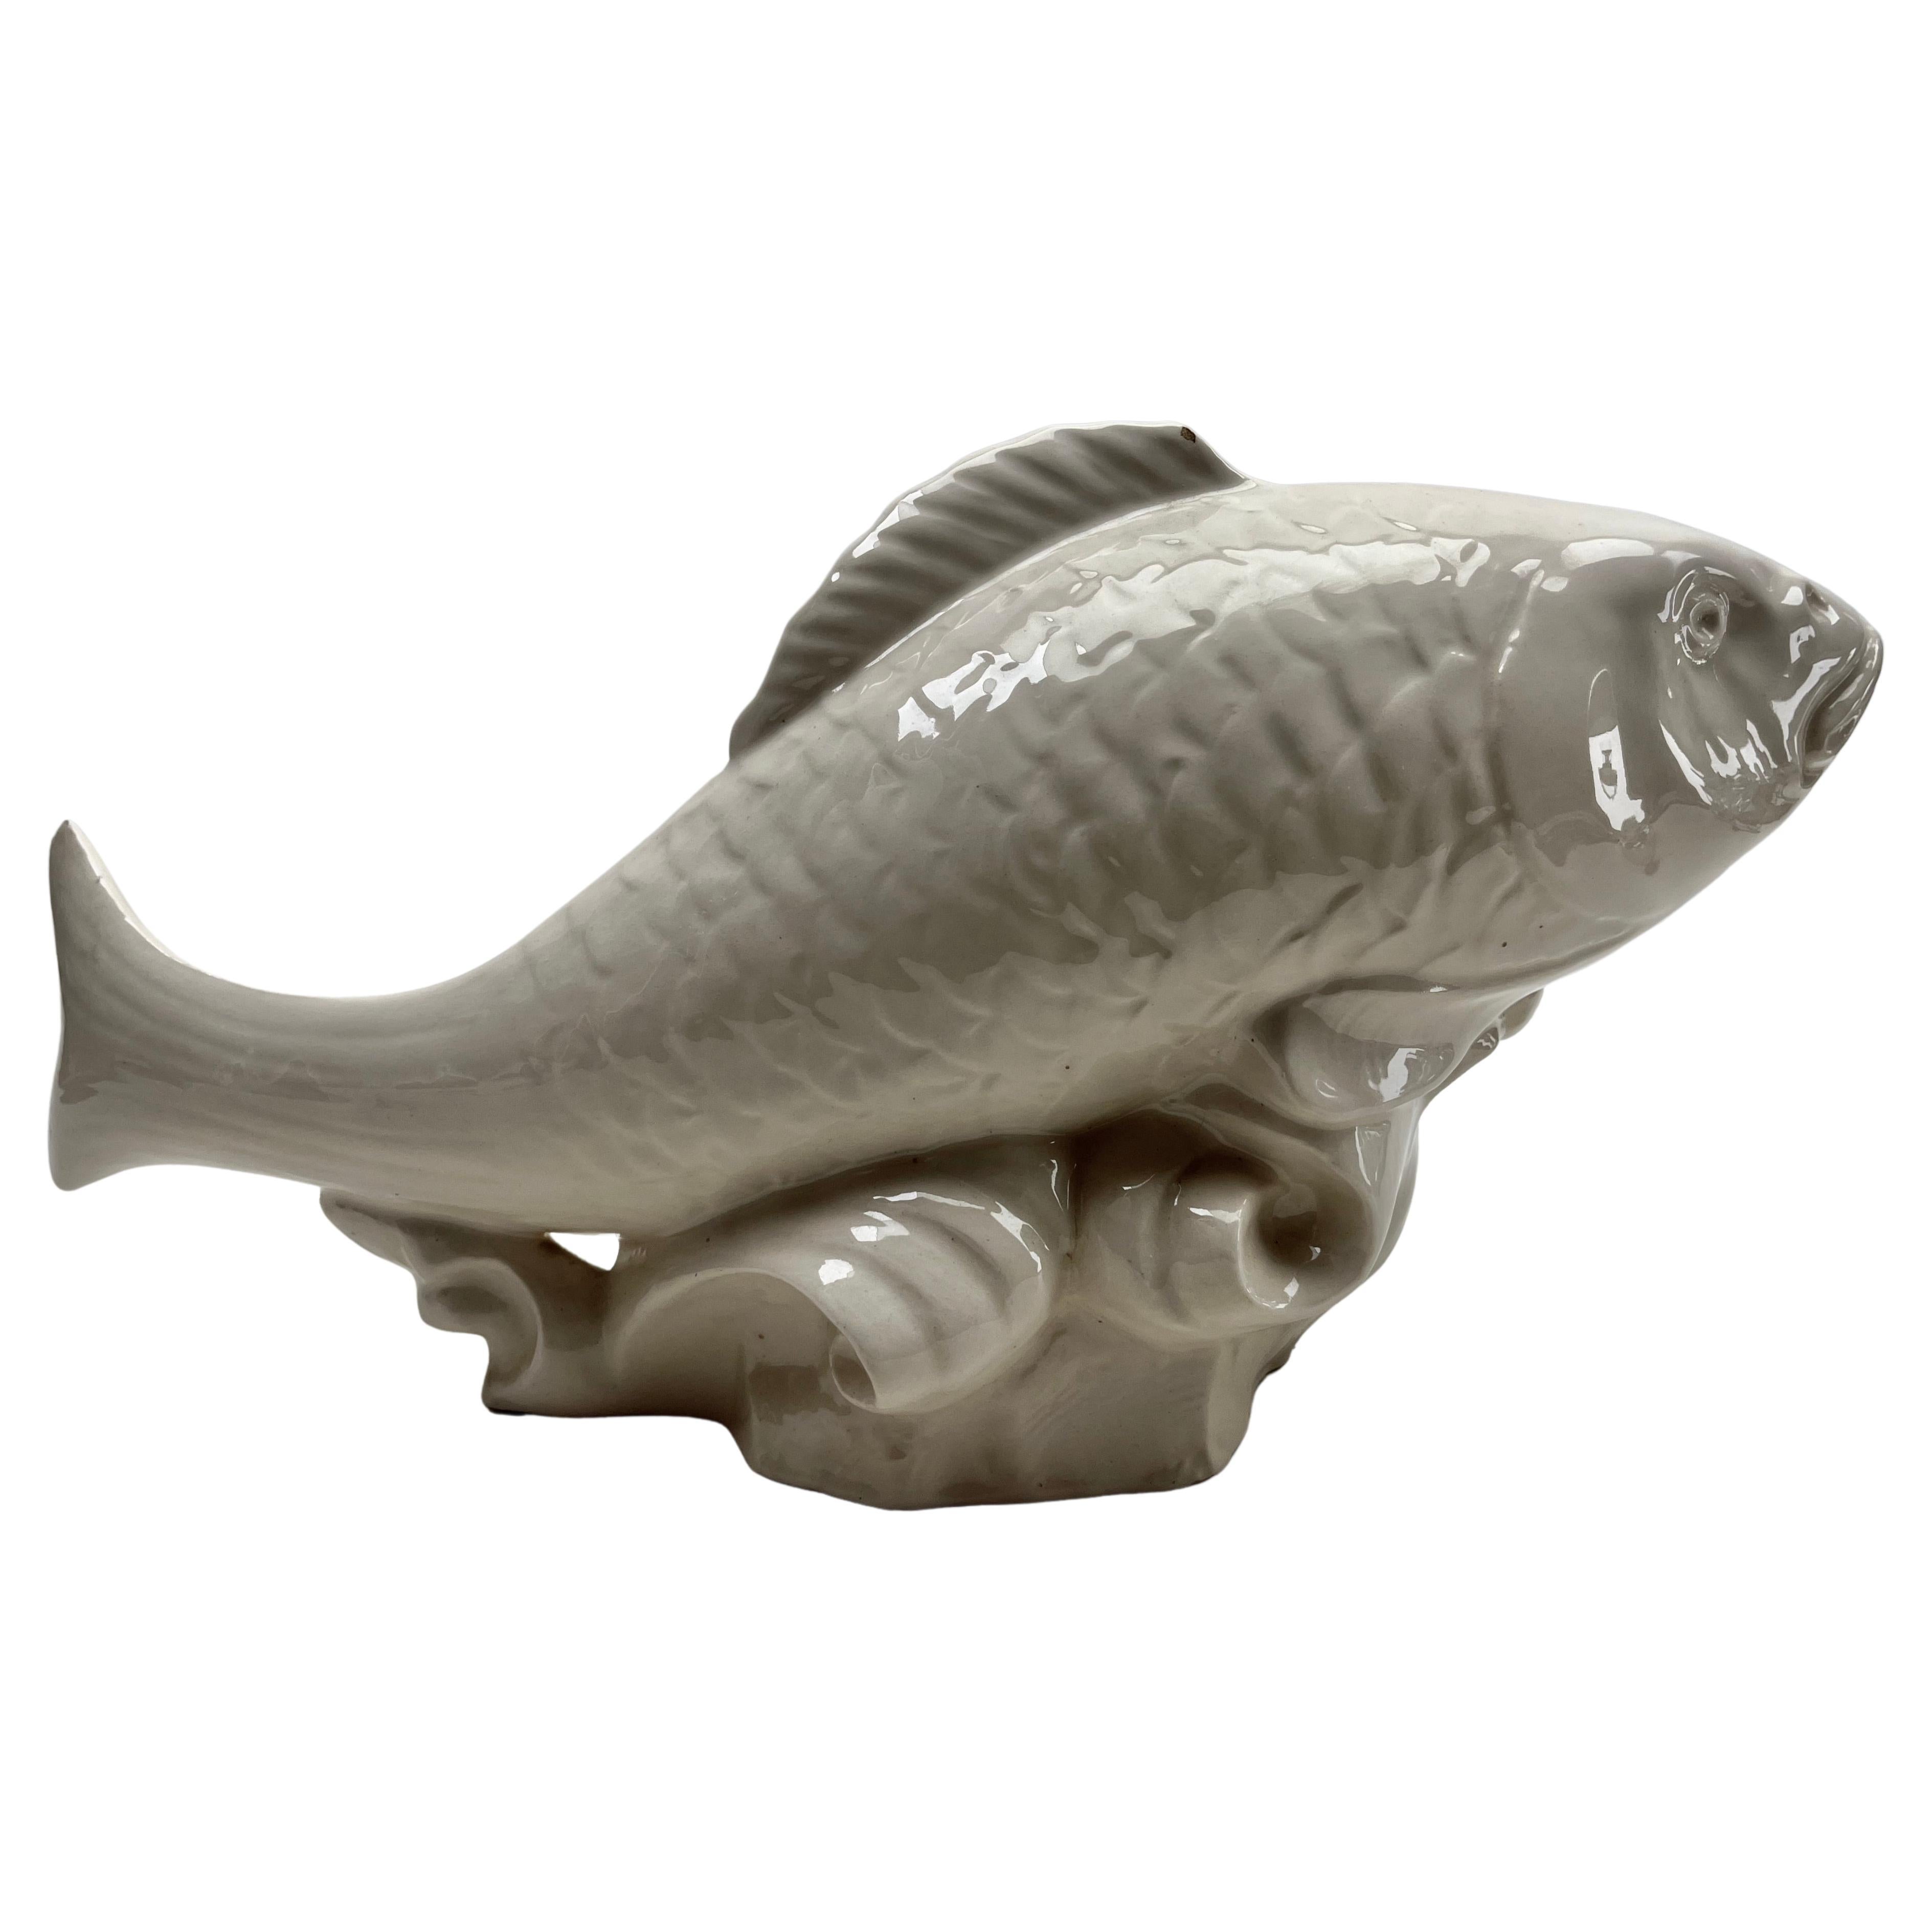 This stylish Fish sculpture dates to the late 1950s-1960s and was fabricated in Italy.
The piece is in Good condition and a real beauty!

Available other Art Nouveau, Art deco and Vintage pieces:

With Best Wishes 
Geert.



